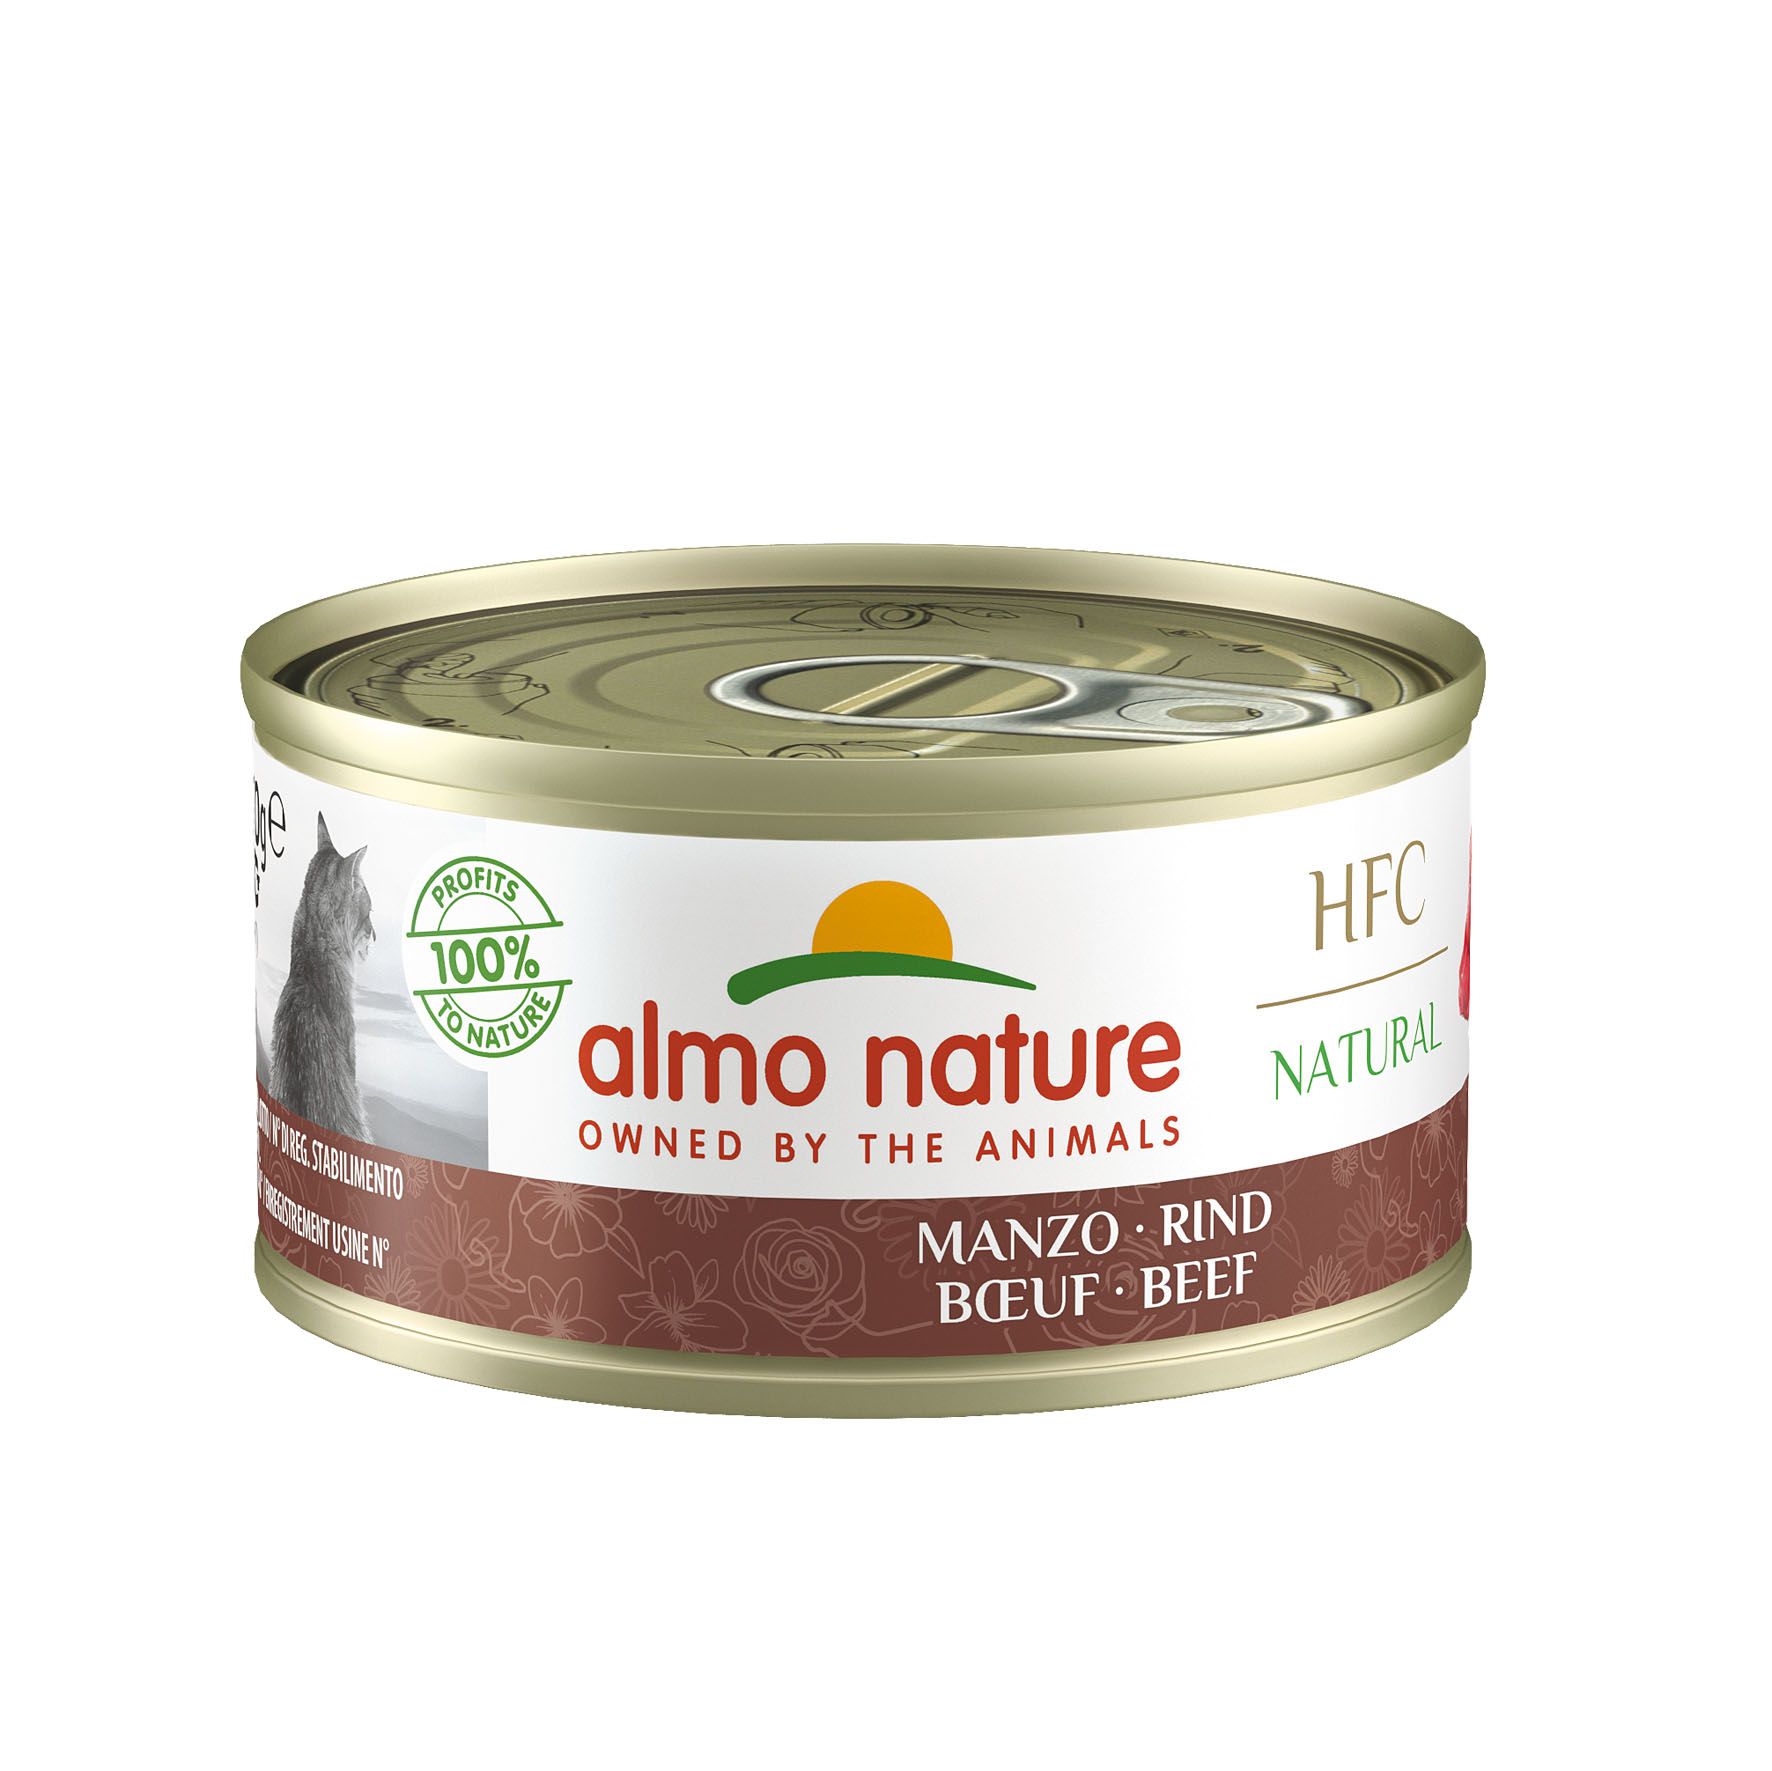 Almo Nature Classic, Beef 24 x 70g